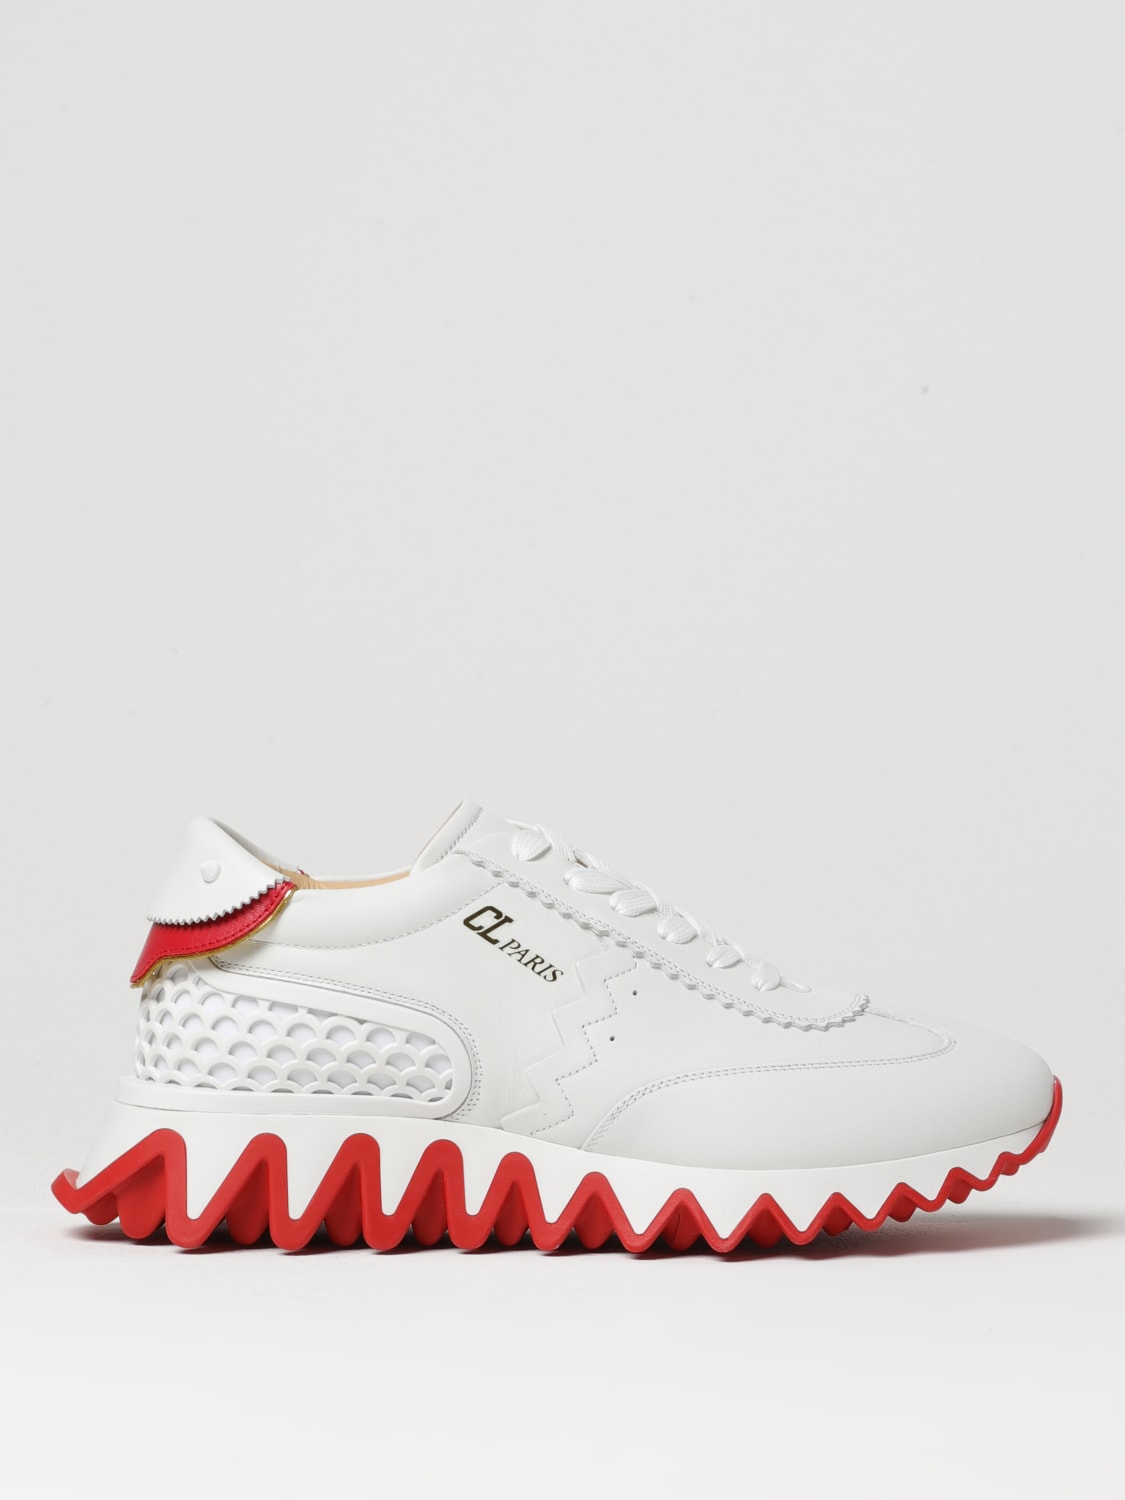 Christian Louboutin Lace-Up Fashion Sneakers